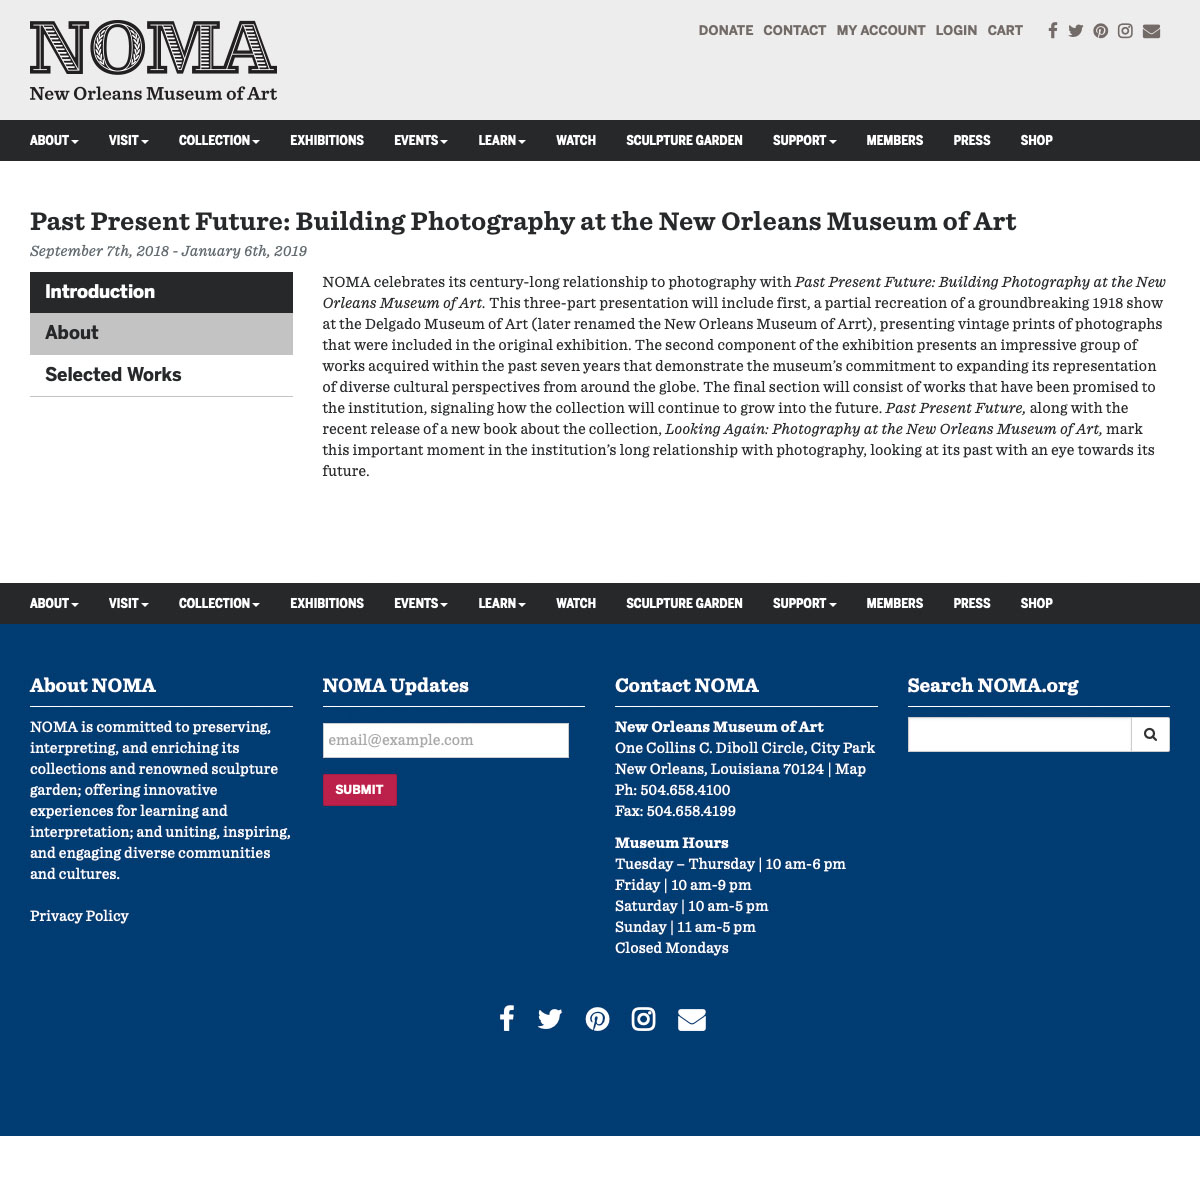 2018-09-07_NOMA, Past Present Future_ Building Photography at the New Orleans Museum of Art,2018 002.jpg